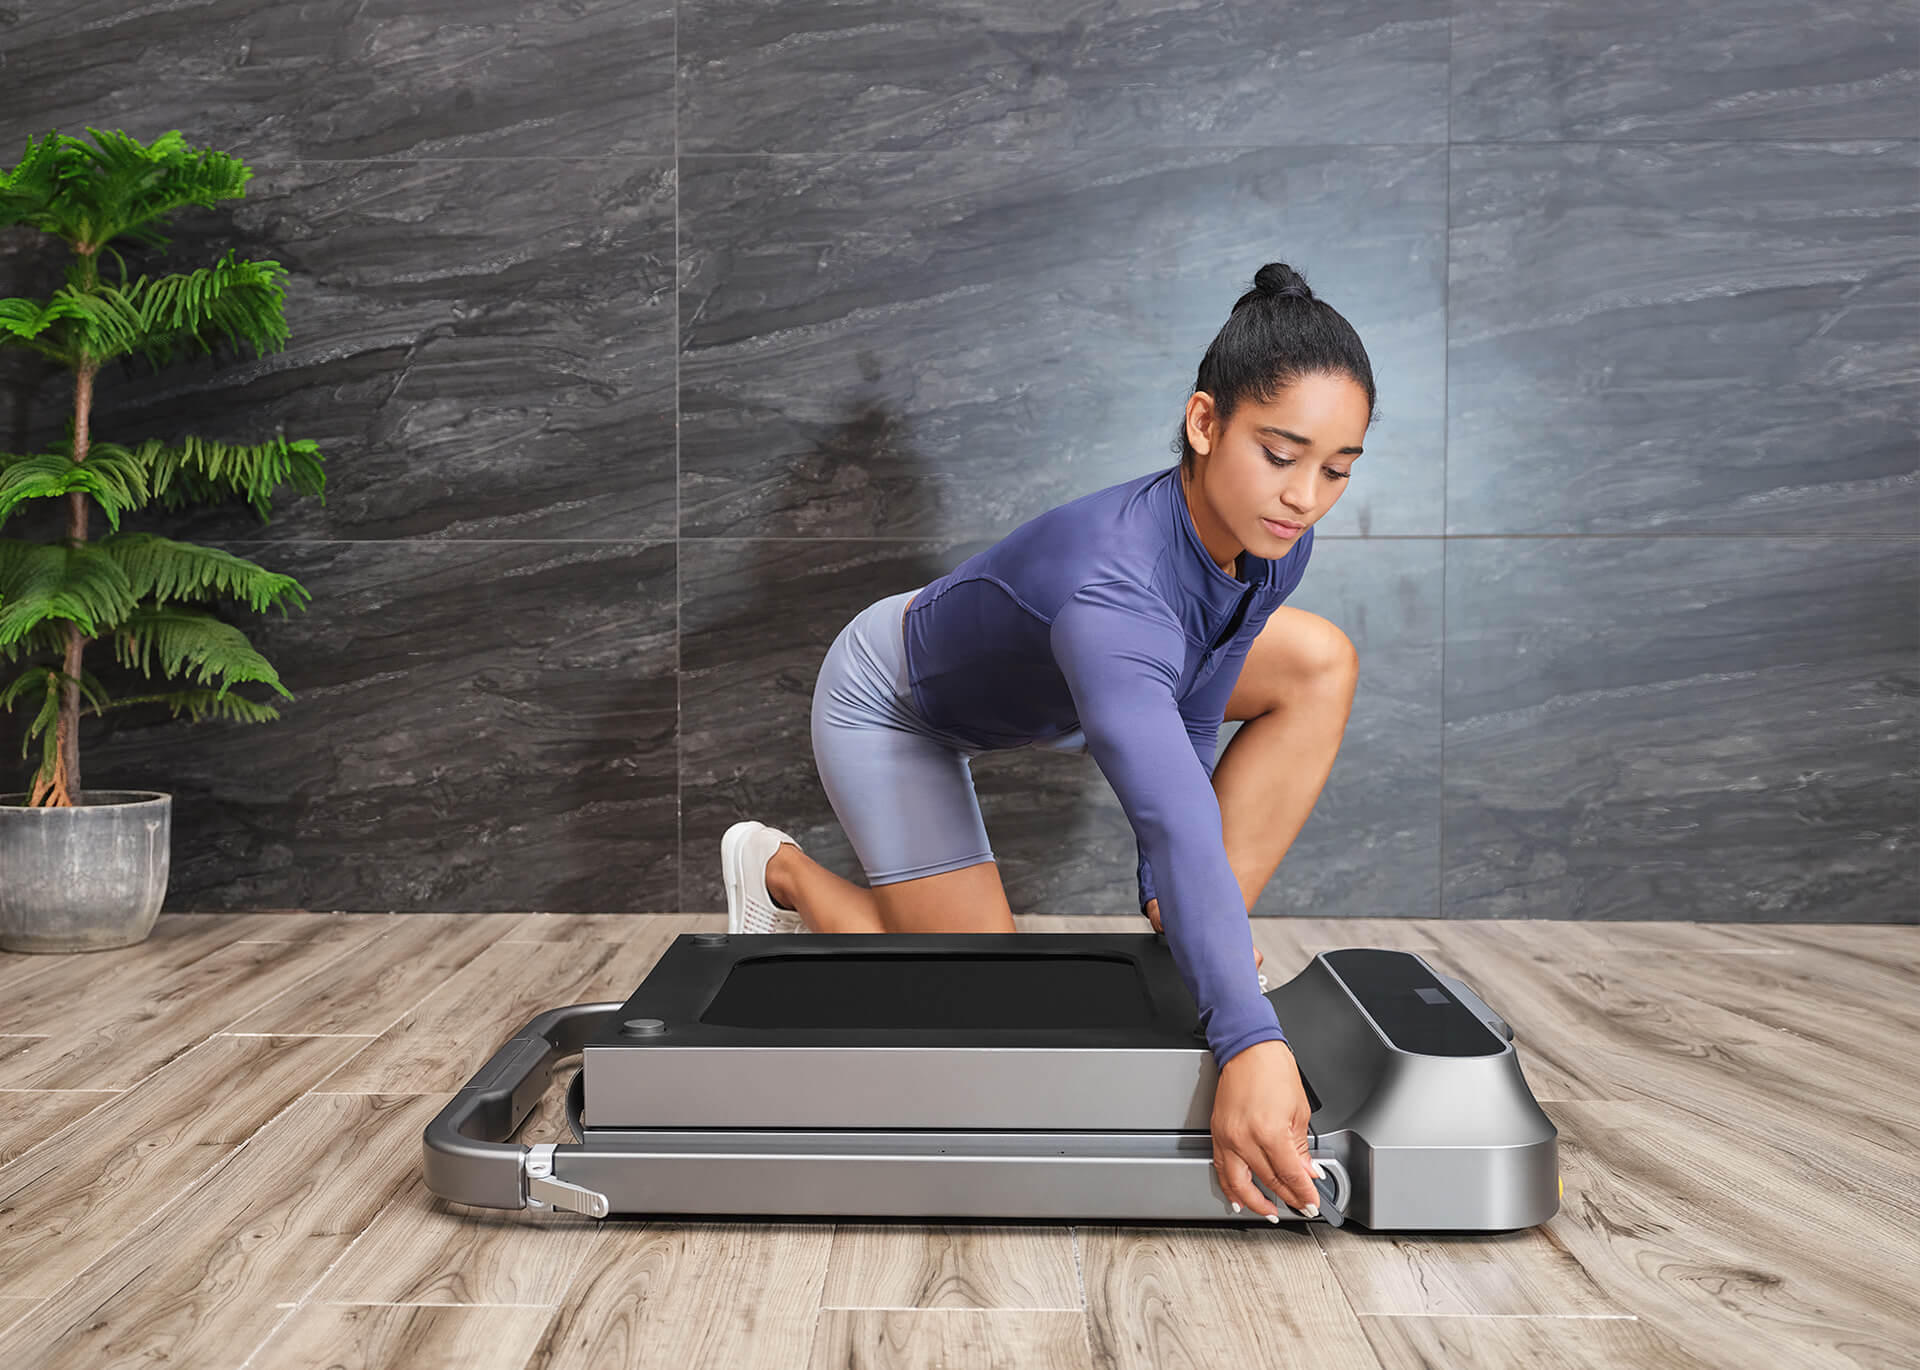 Shop Great Running Treadmill with Competitive Price Now |WalkingPad